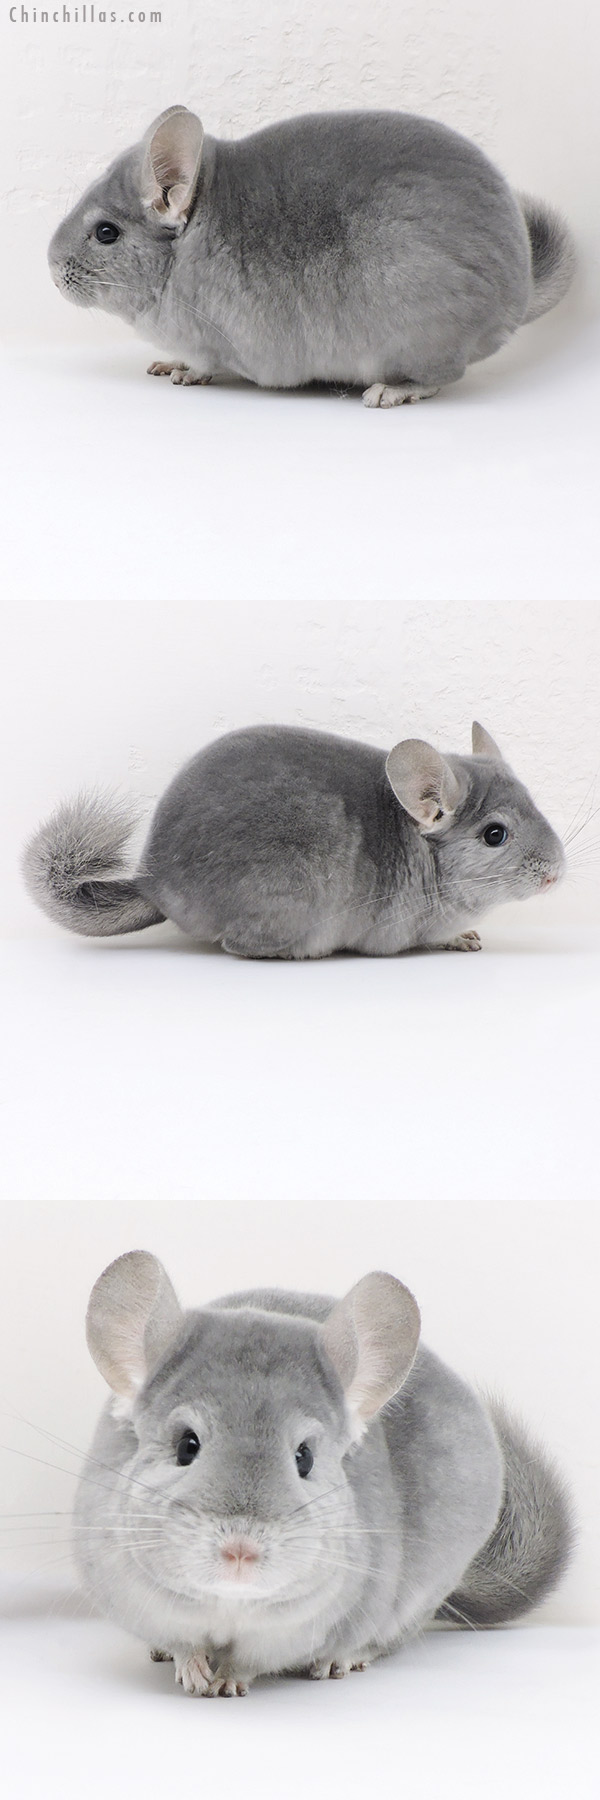 Chinchilla or related item offered for sale or export on Chinchillas.com - 17346 Premium Production Quality Light Wrap Around Blue Diamond Female Chinchilla